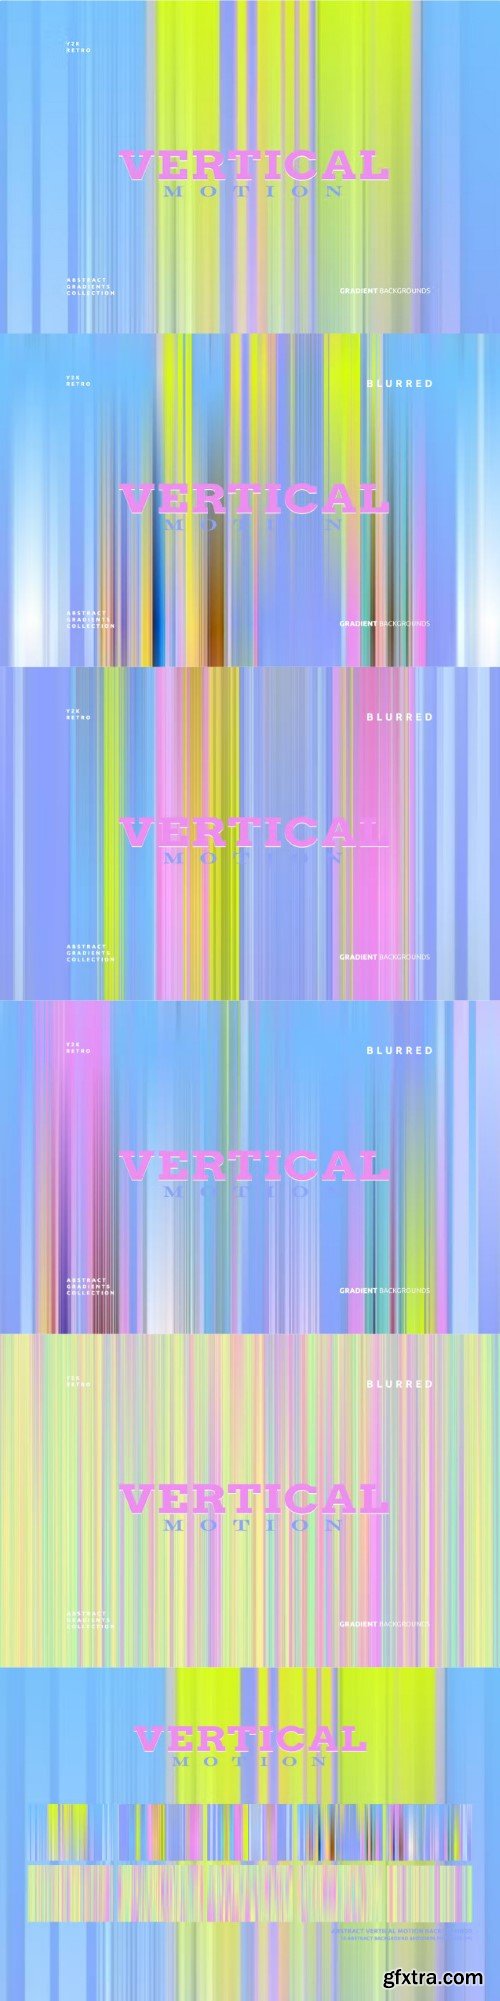 Abstract Vertical Motion Backgrounds 10